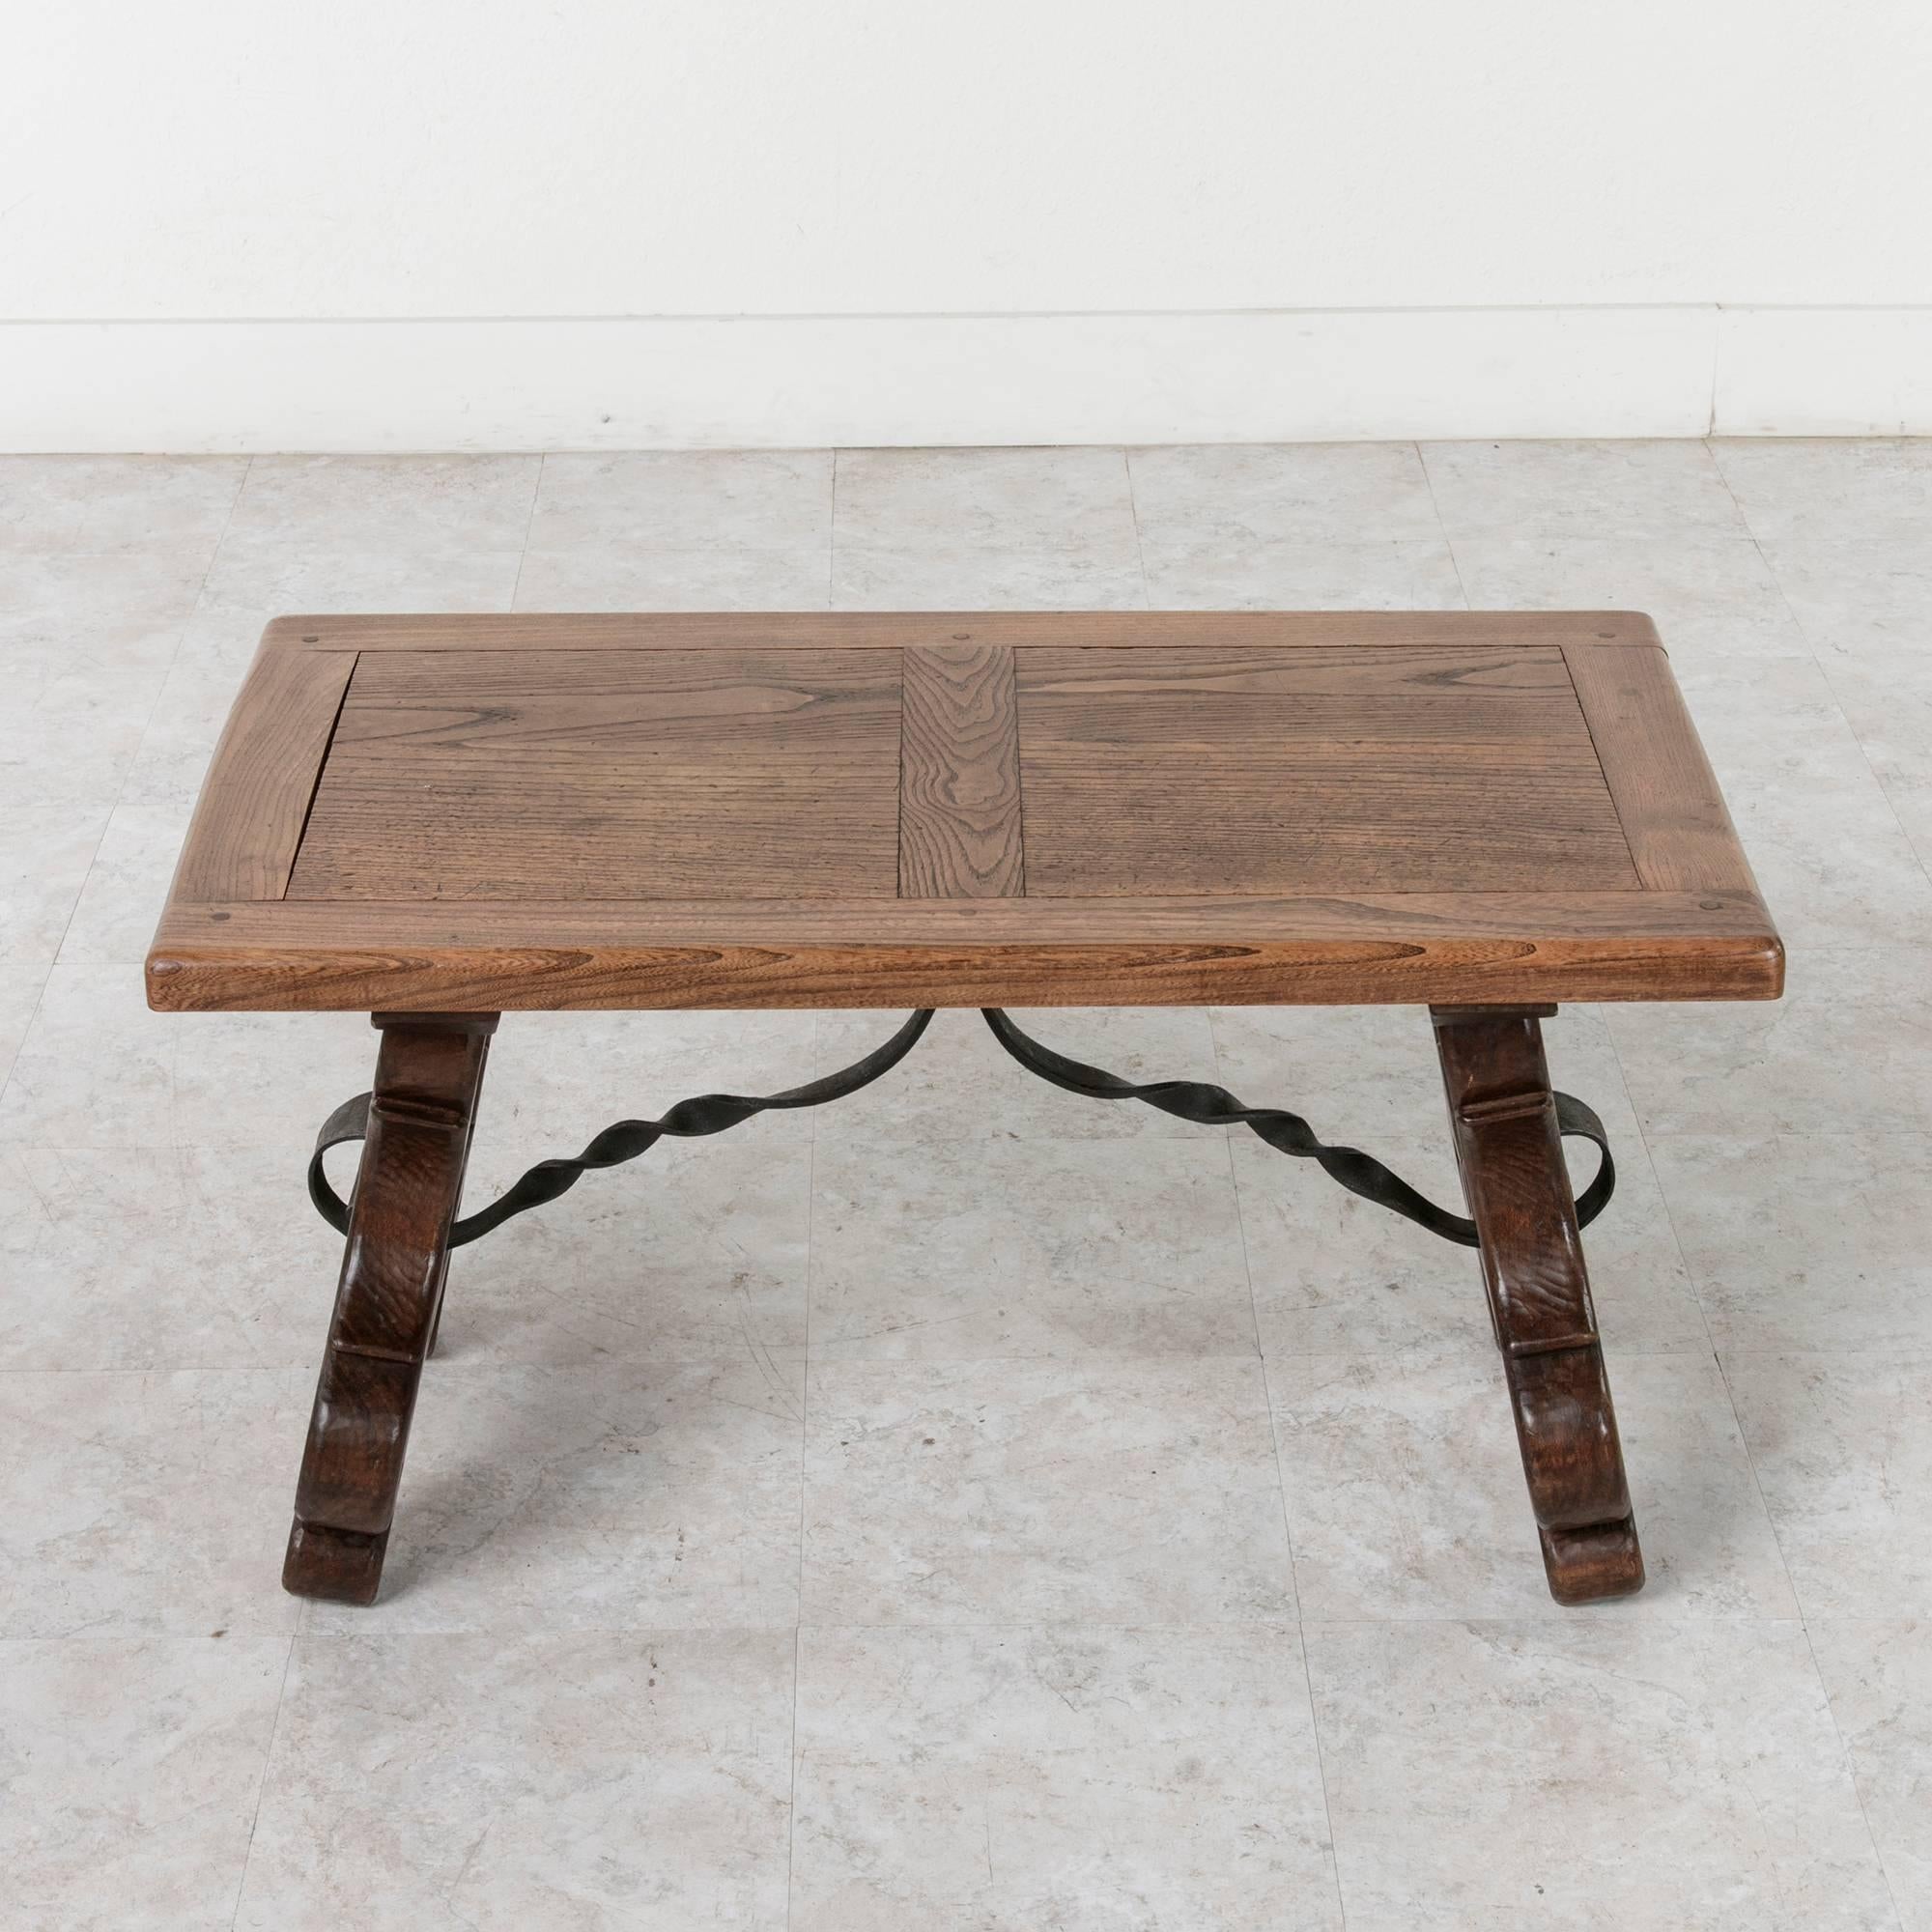 French Early 20th Century Spanish Style Oak Coffee Table or Bench with Iron Stretcher